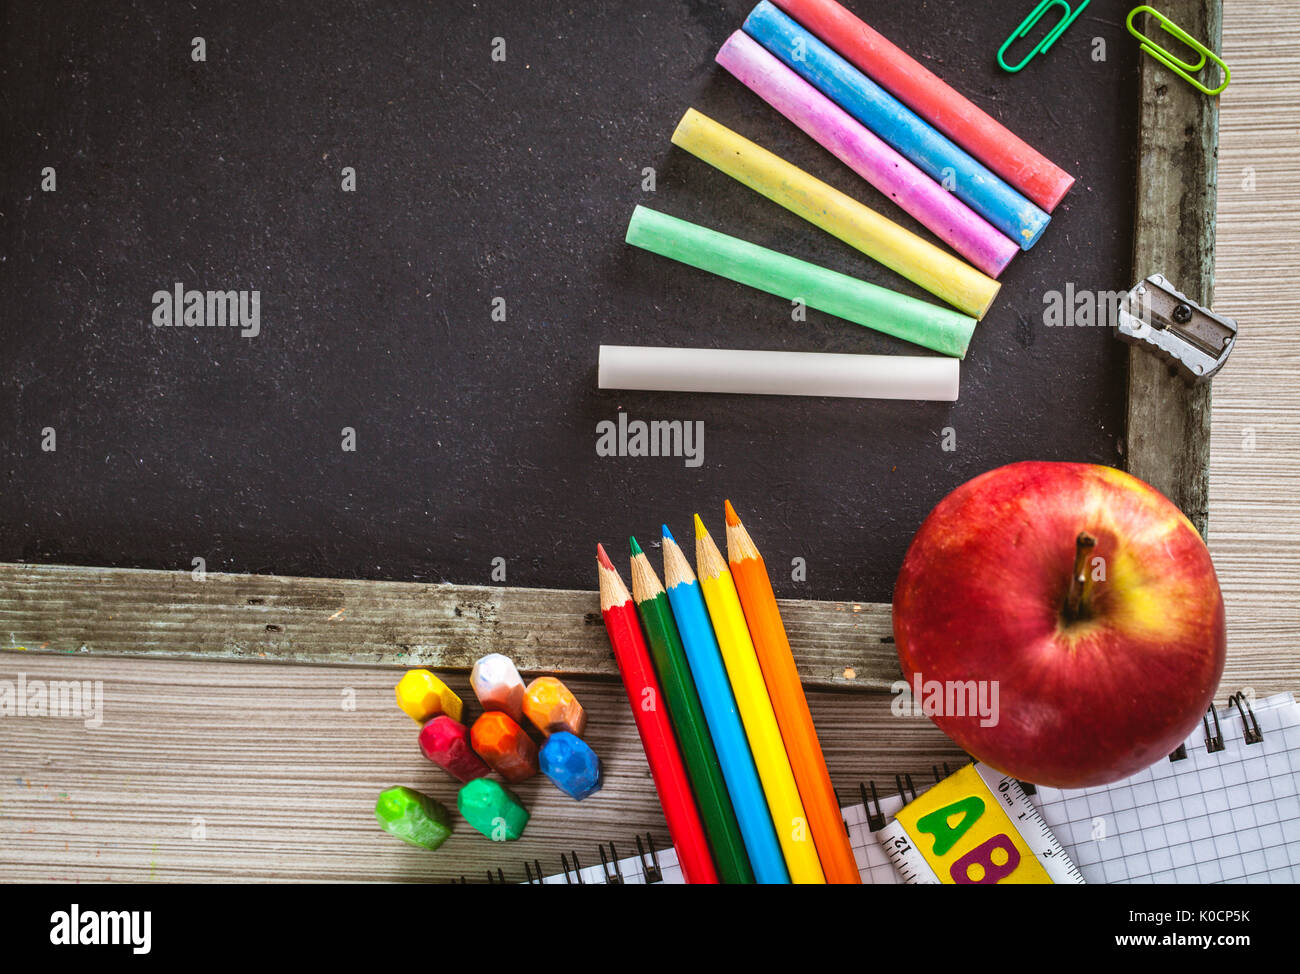 School objects for students. Chalkboard, pencils, crayons and apple Stock  Photo - Alamy